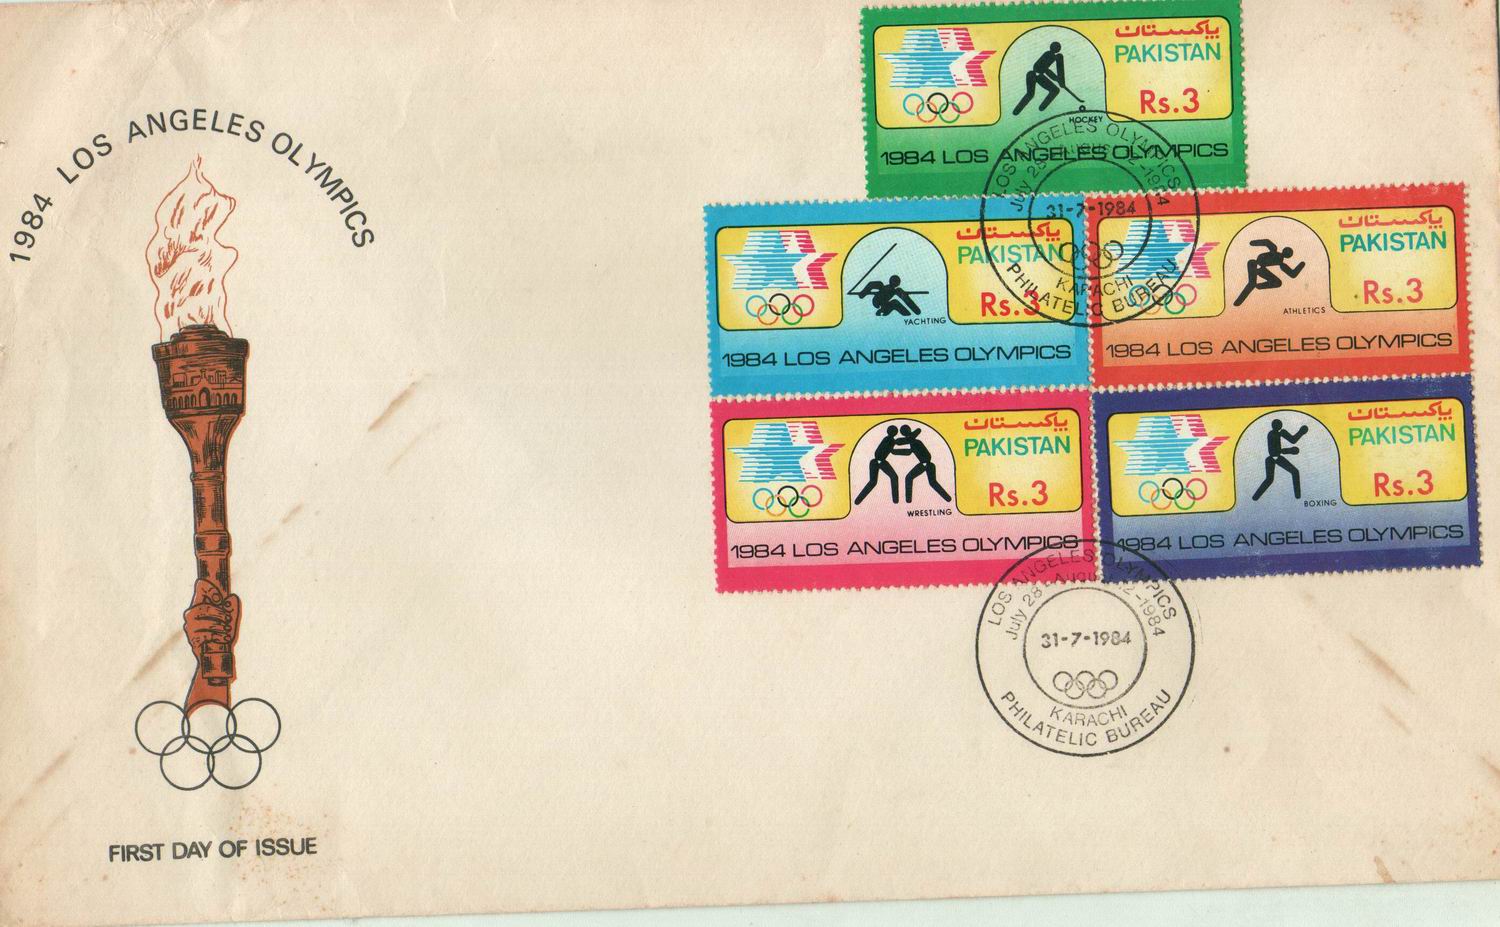 Pakistan Fdc 1984 Brochure & Stamps Los Angeles Olympics - Click Image to Close